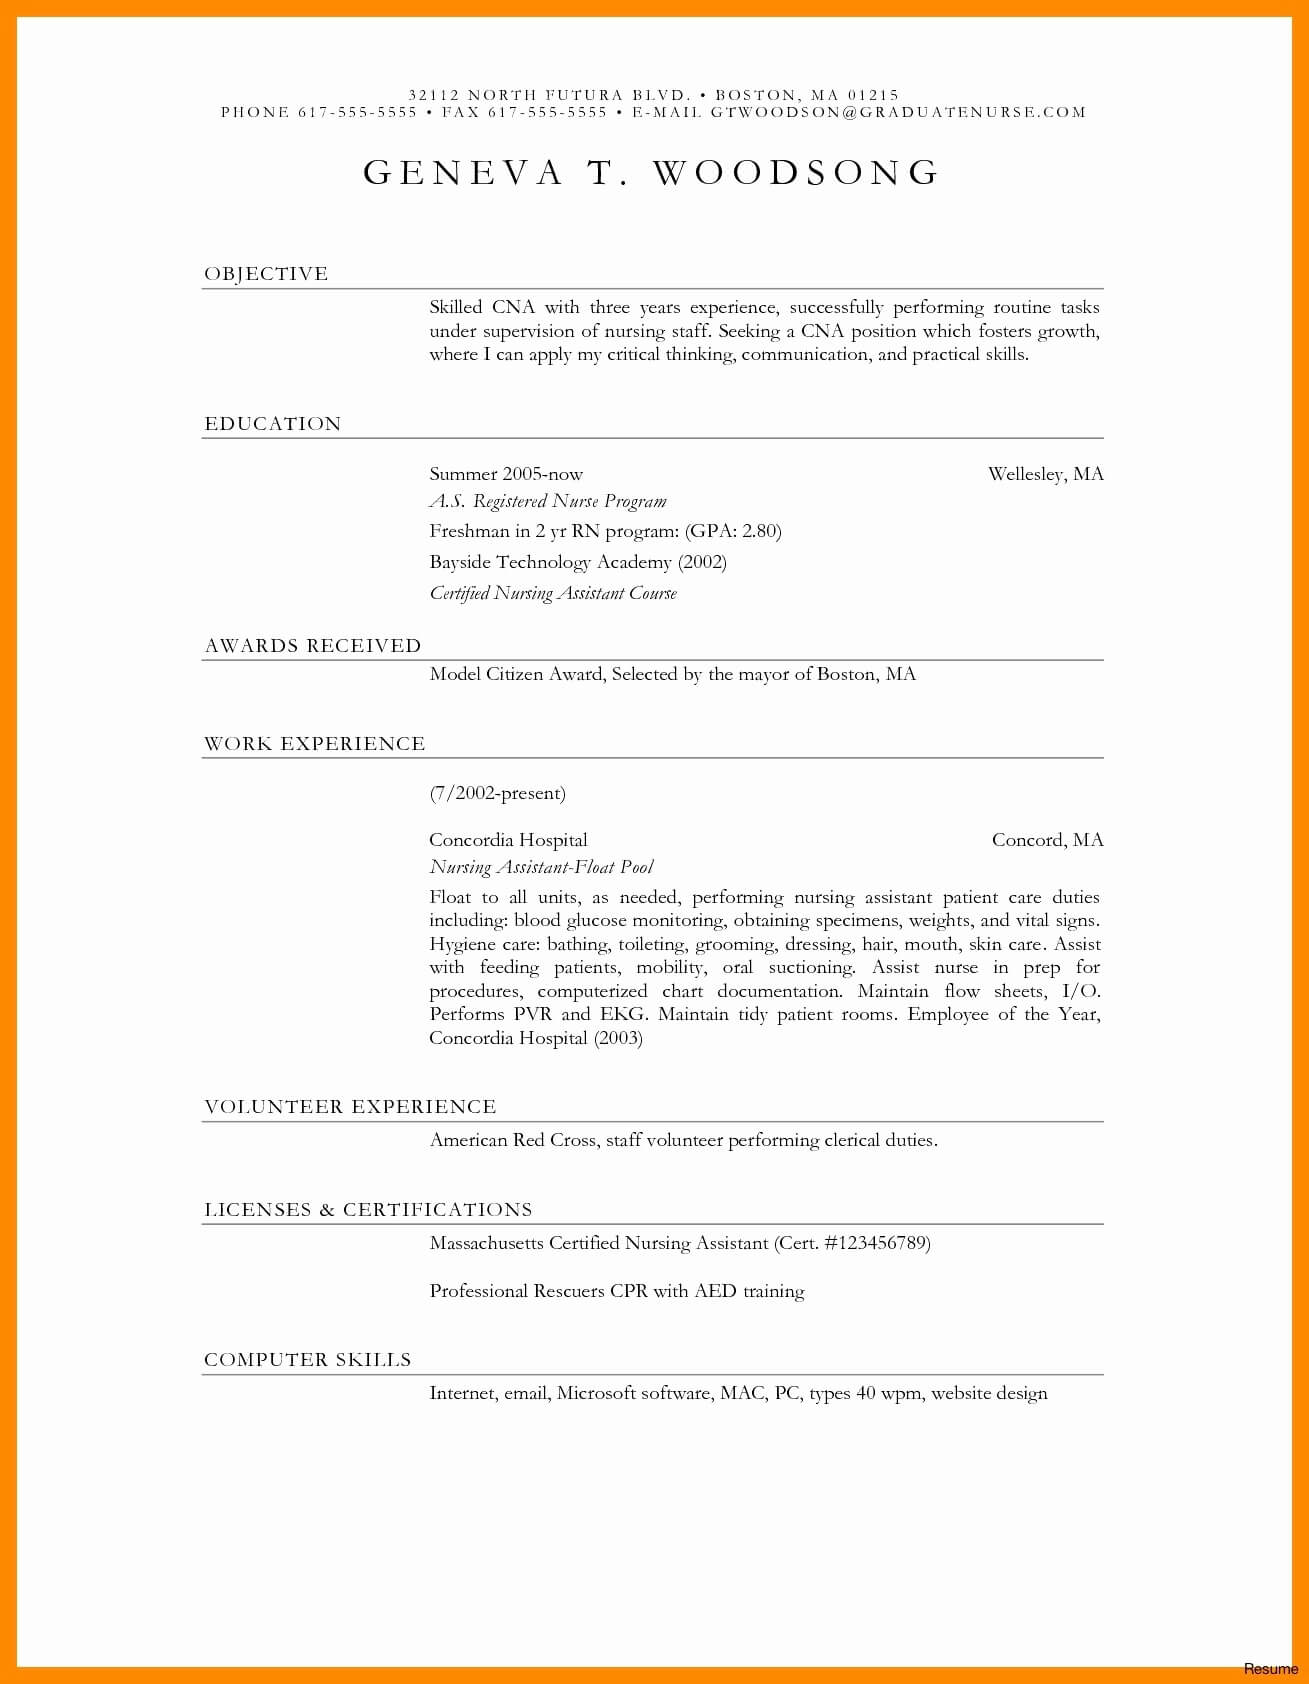 9 10 Booklet Template Word Download | Aikenexplorer With Regard To Bookplate Templates For Word